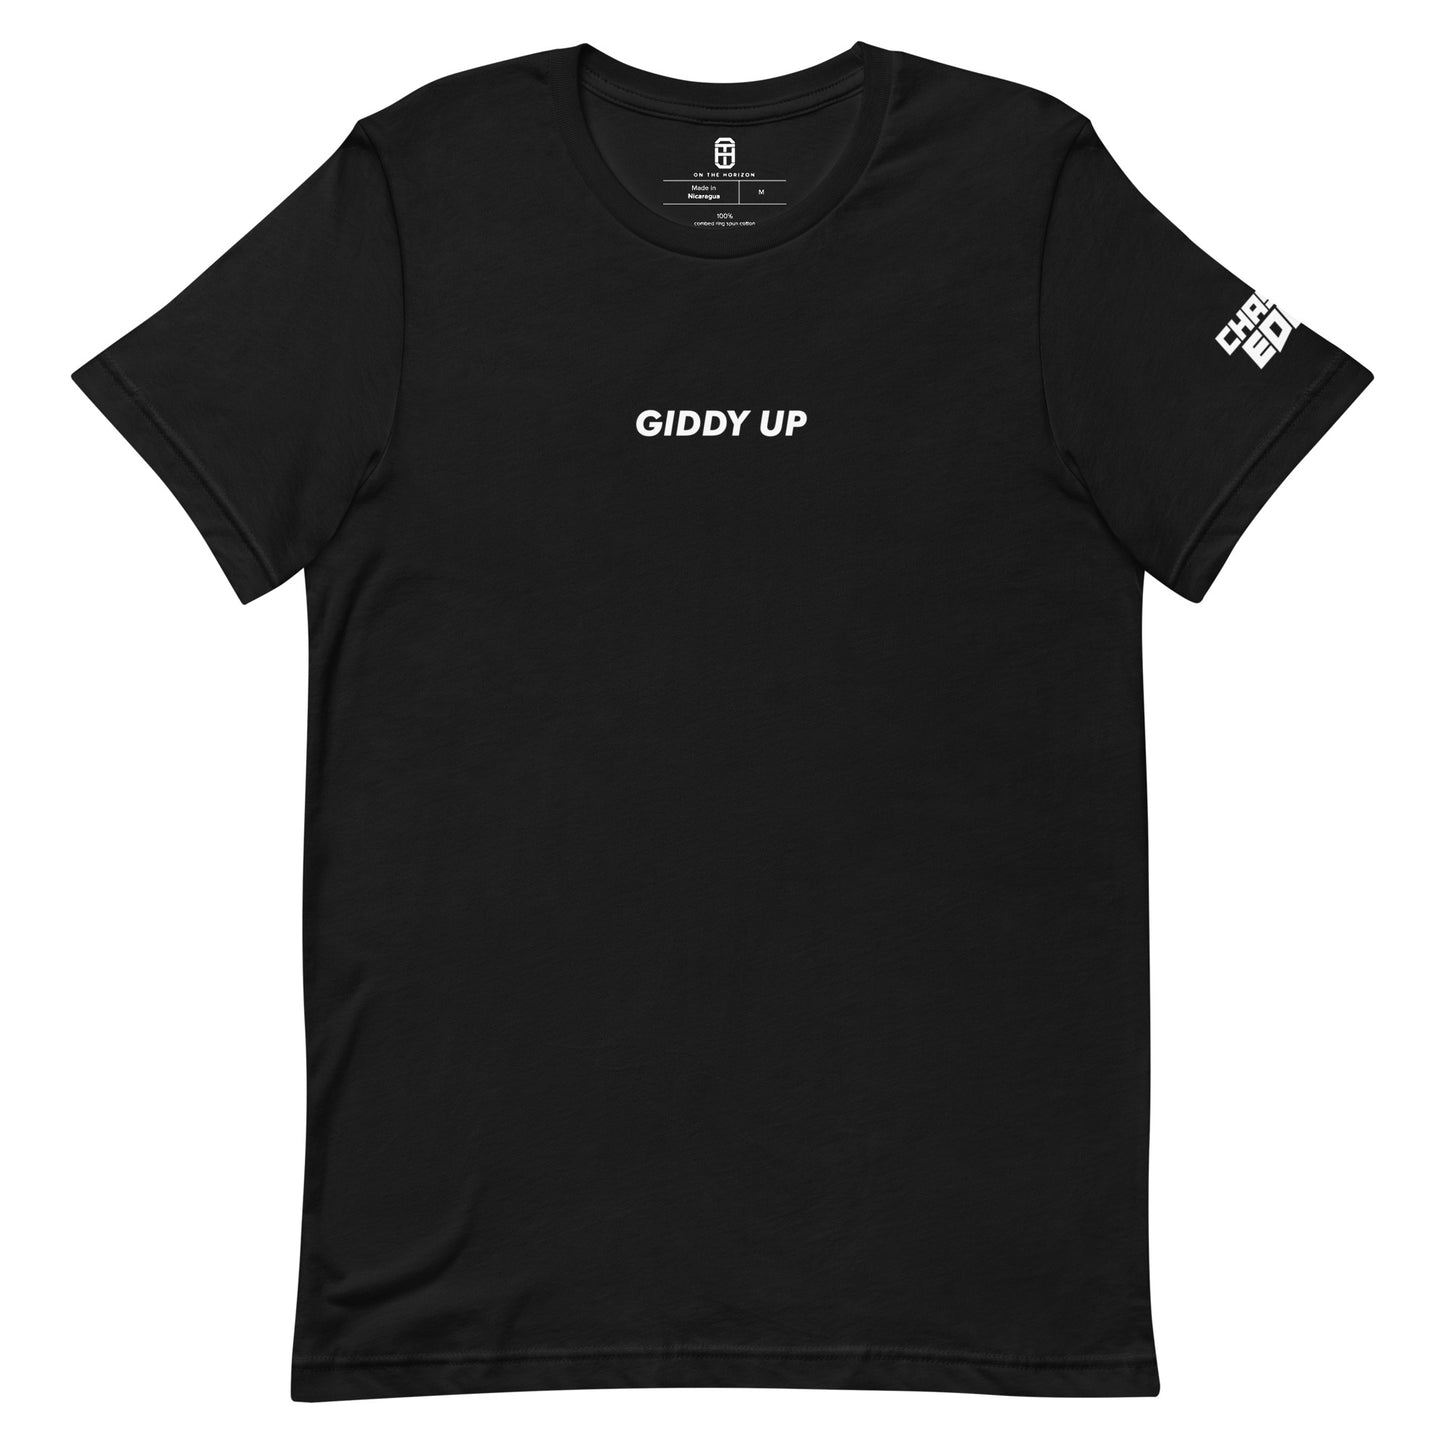 CHASING EDGES GIDDY UP SLIM FIT T-SHIRT (MORE COLORS)